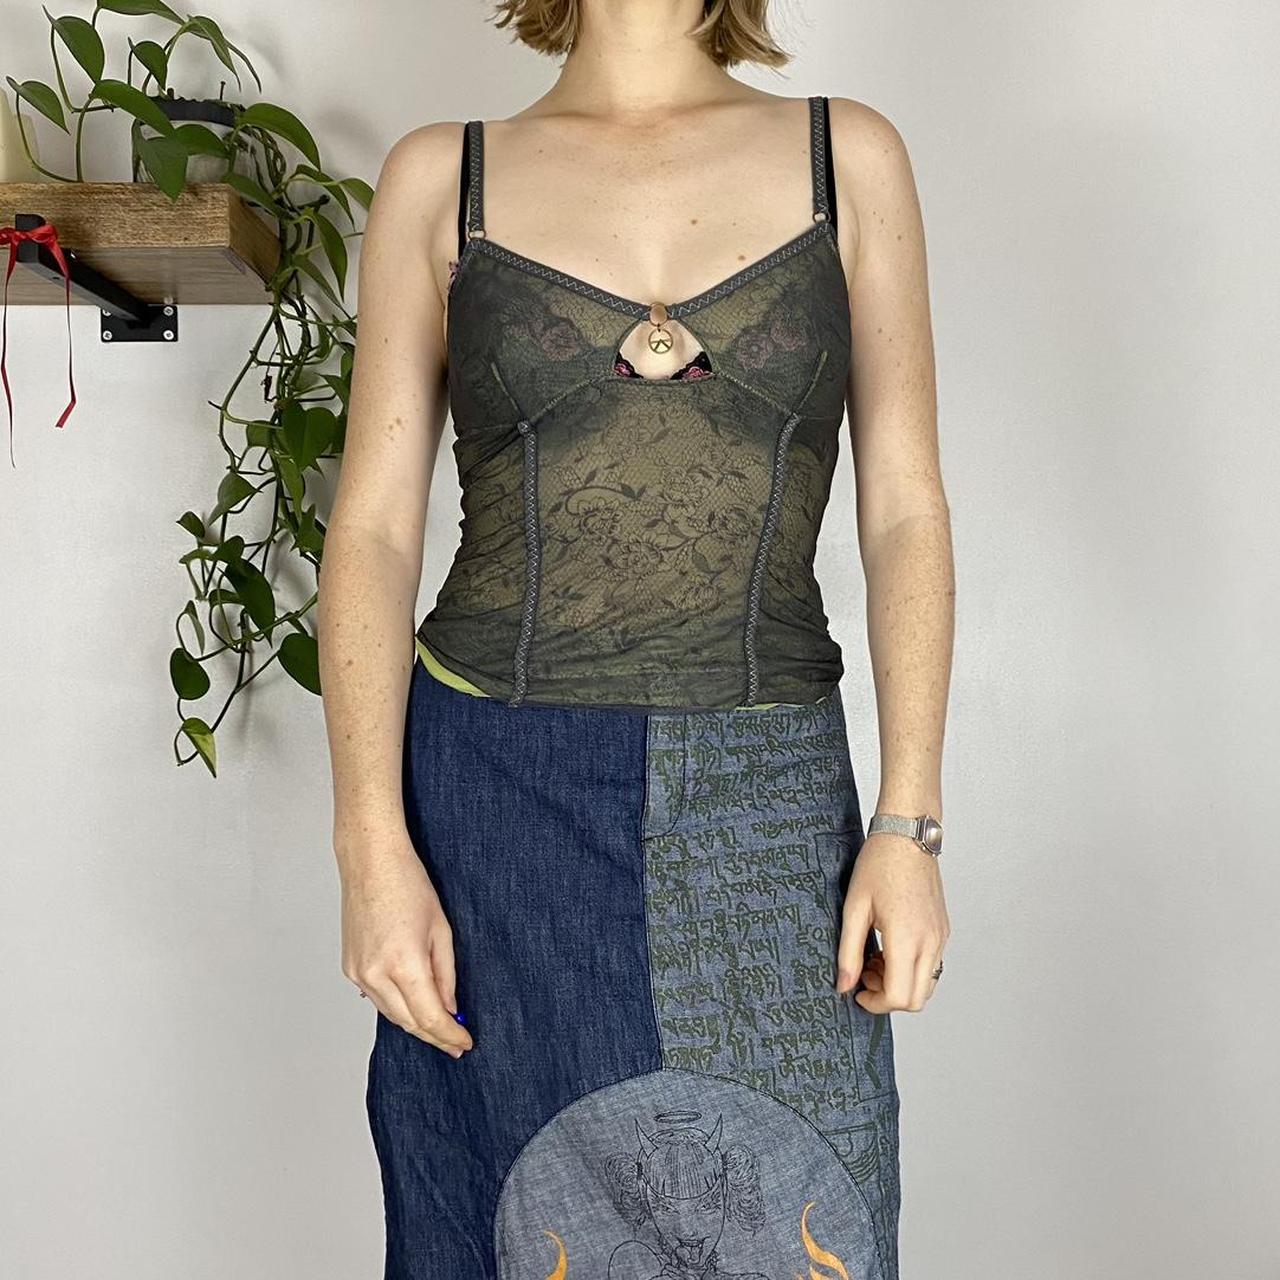 90s vintage mesh cami top size S double layered - Depop